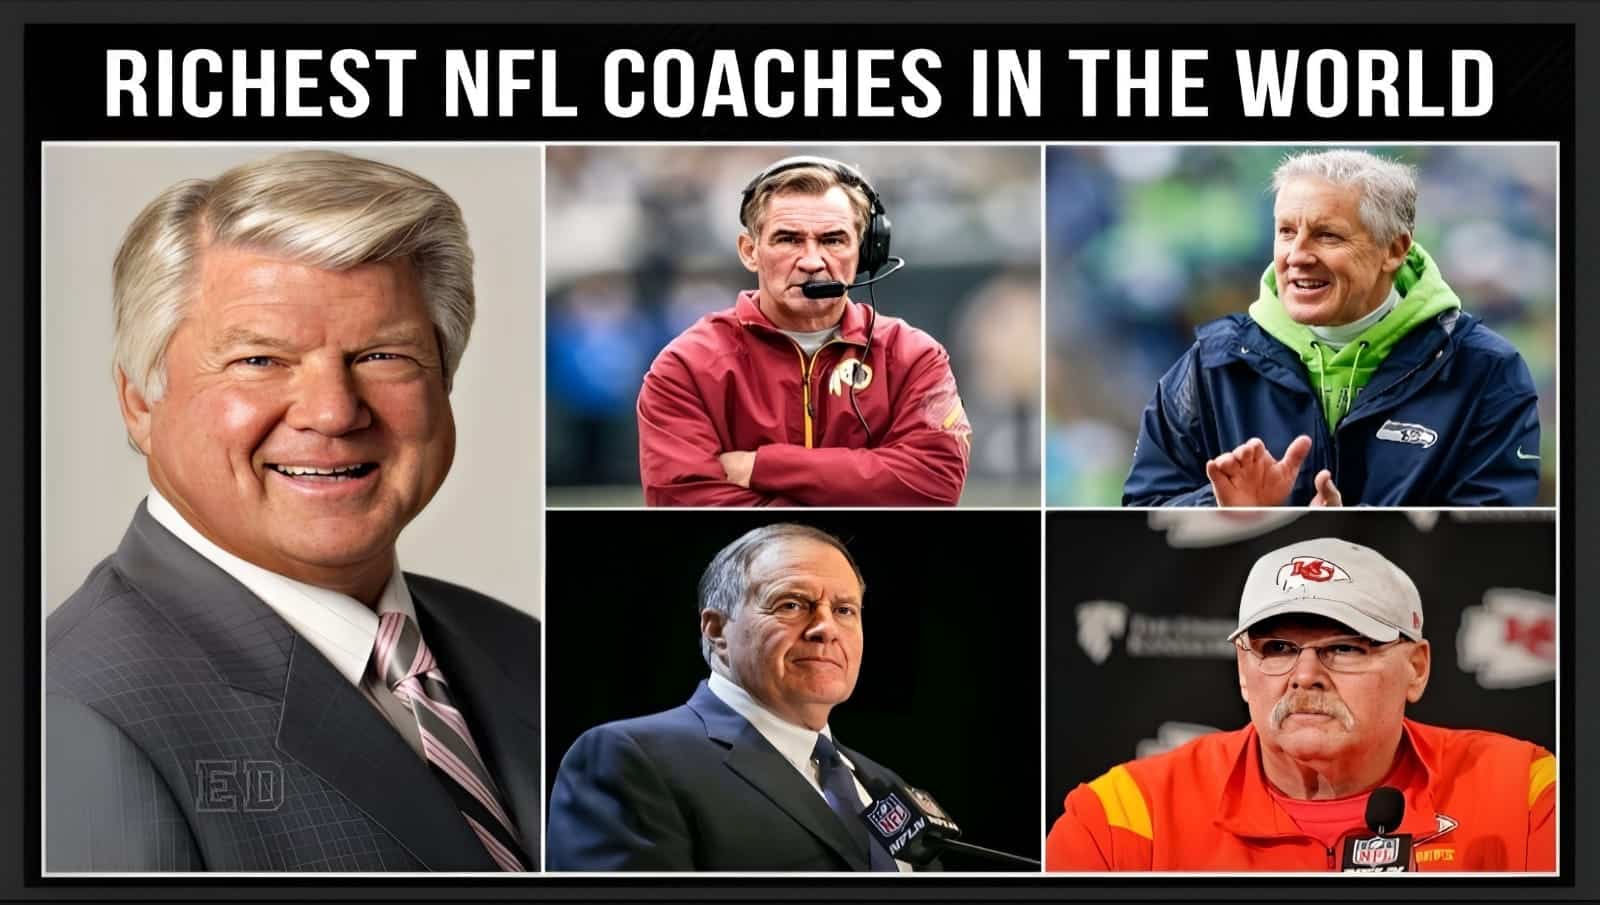 Richest NFL Coaches in the World